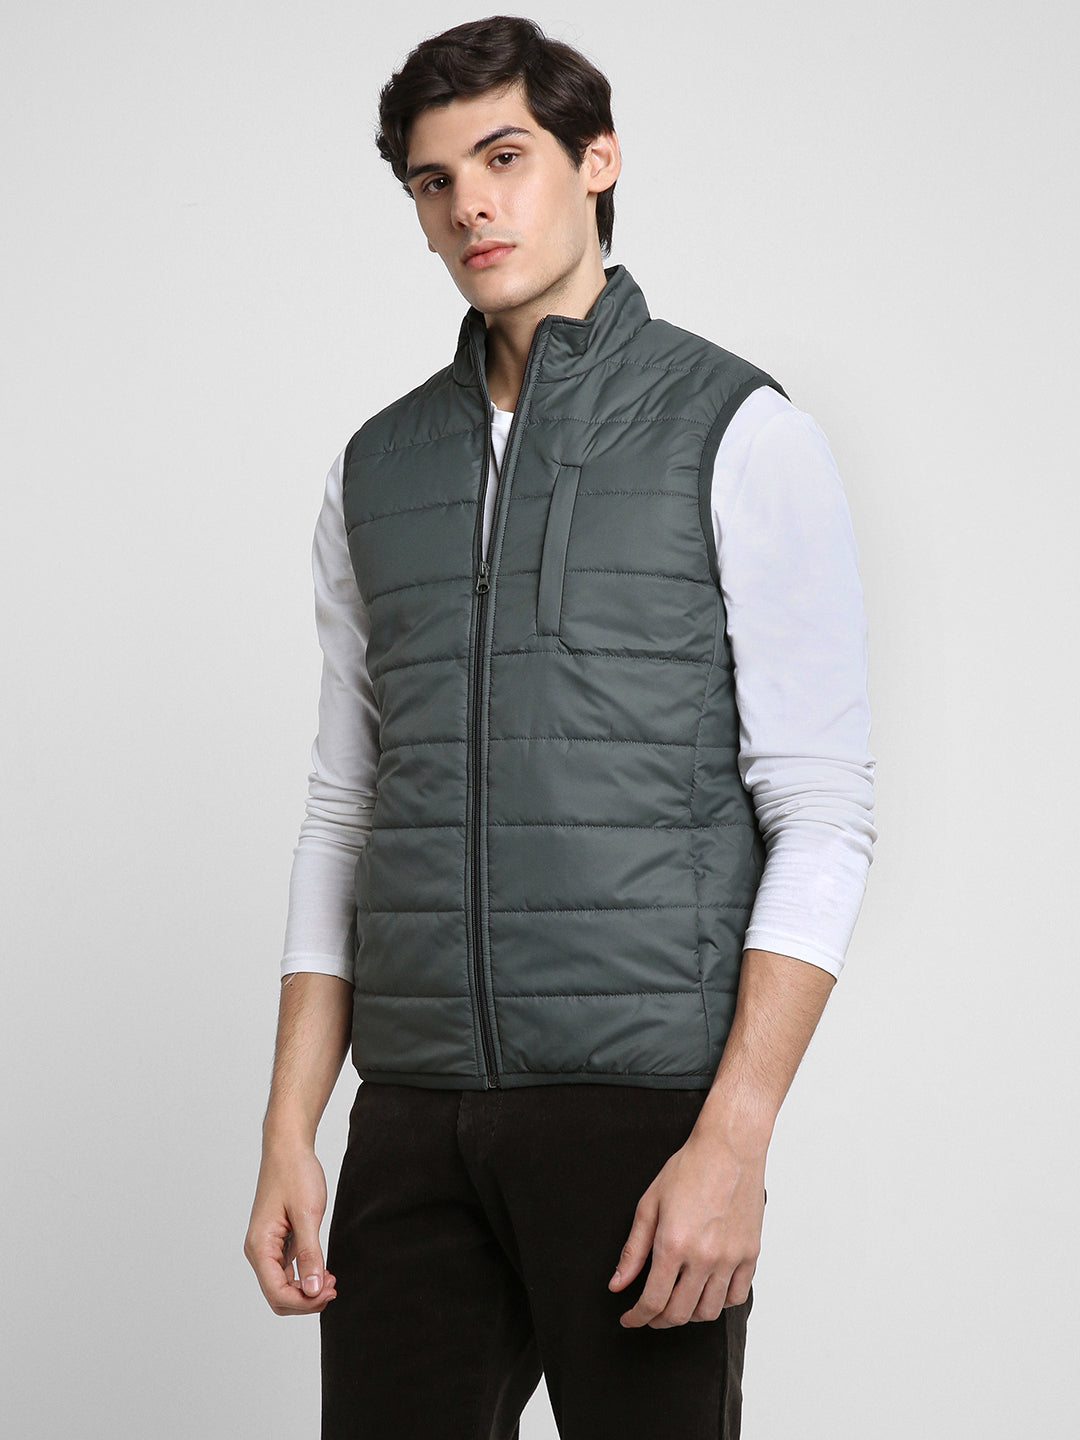 Dennis Lingo Men's Military Solid Quilted High Neck Sleeveless Gillet Jackets